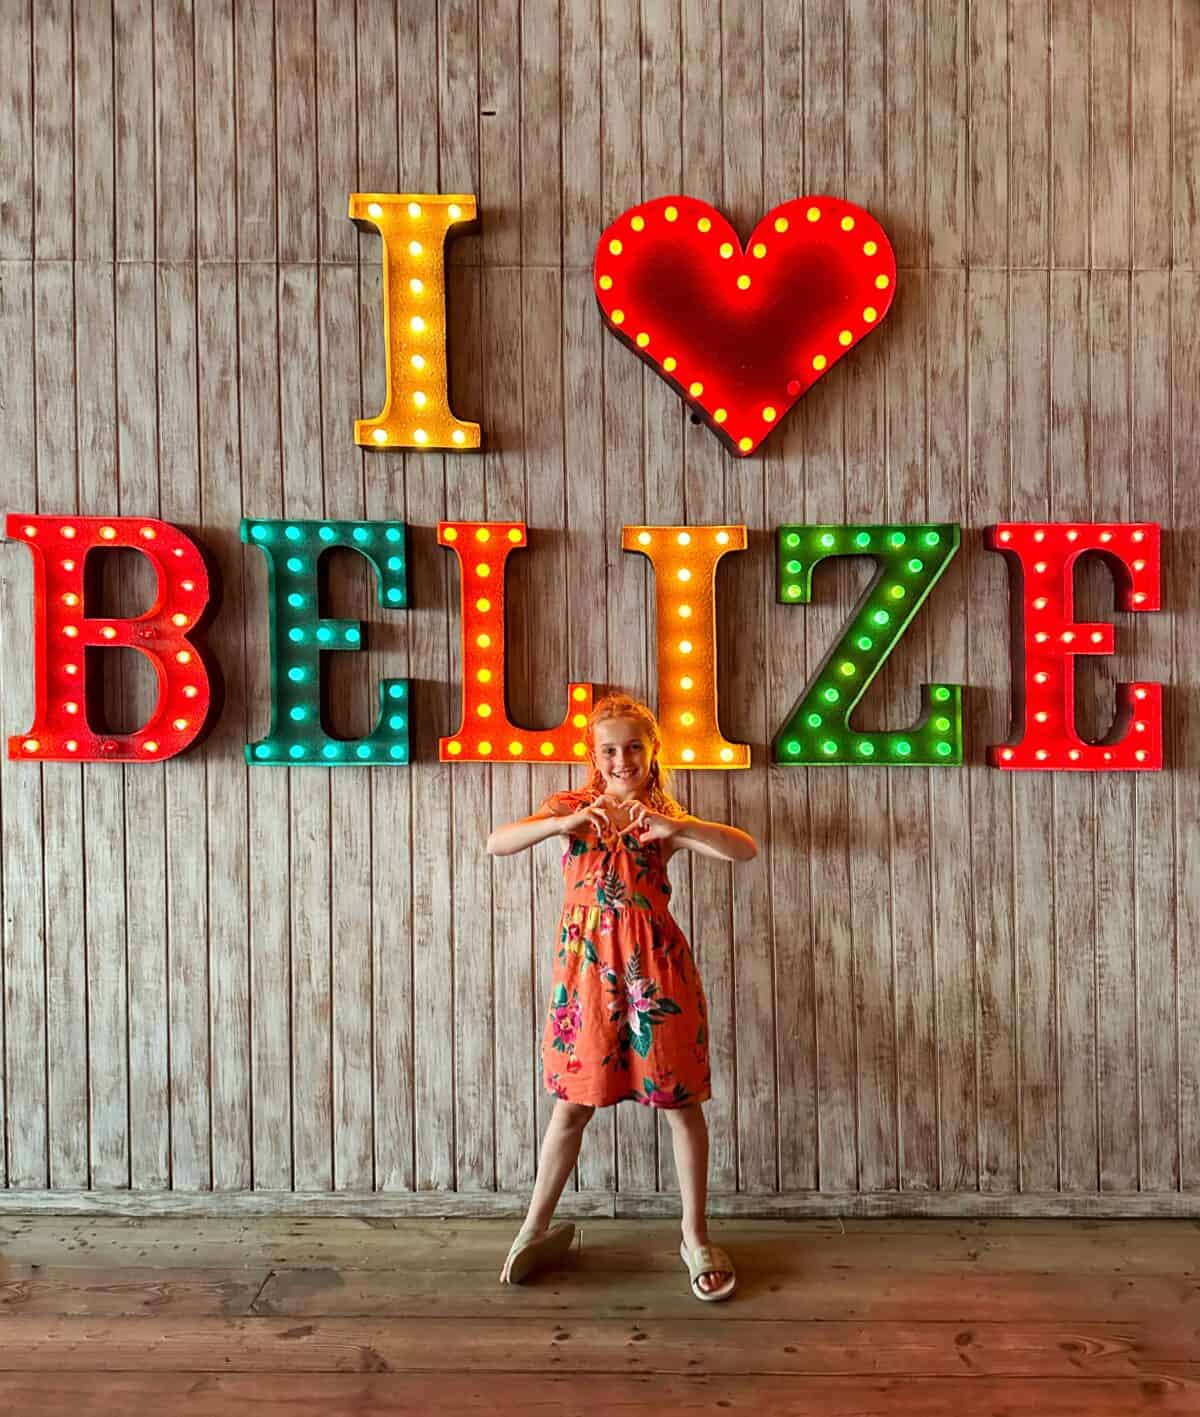 I heart Belize neon sign - Blue Fin Grill Ambergris Caye